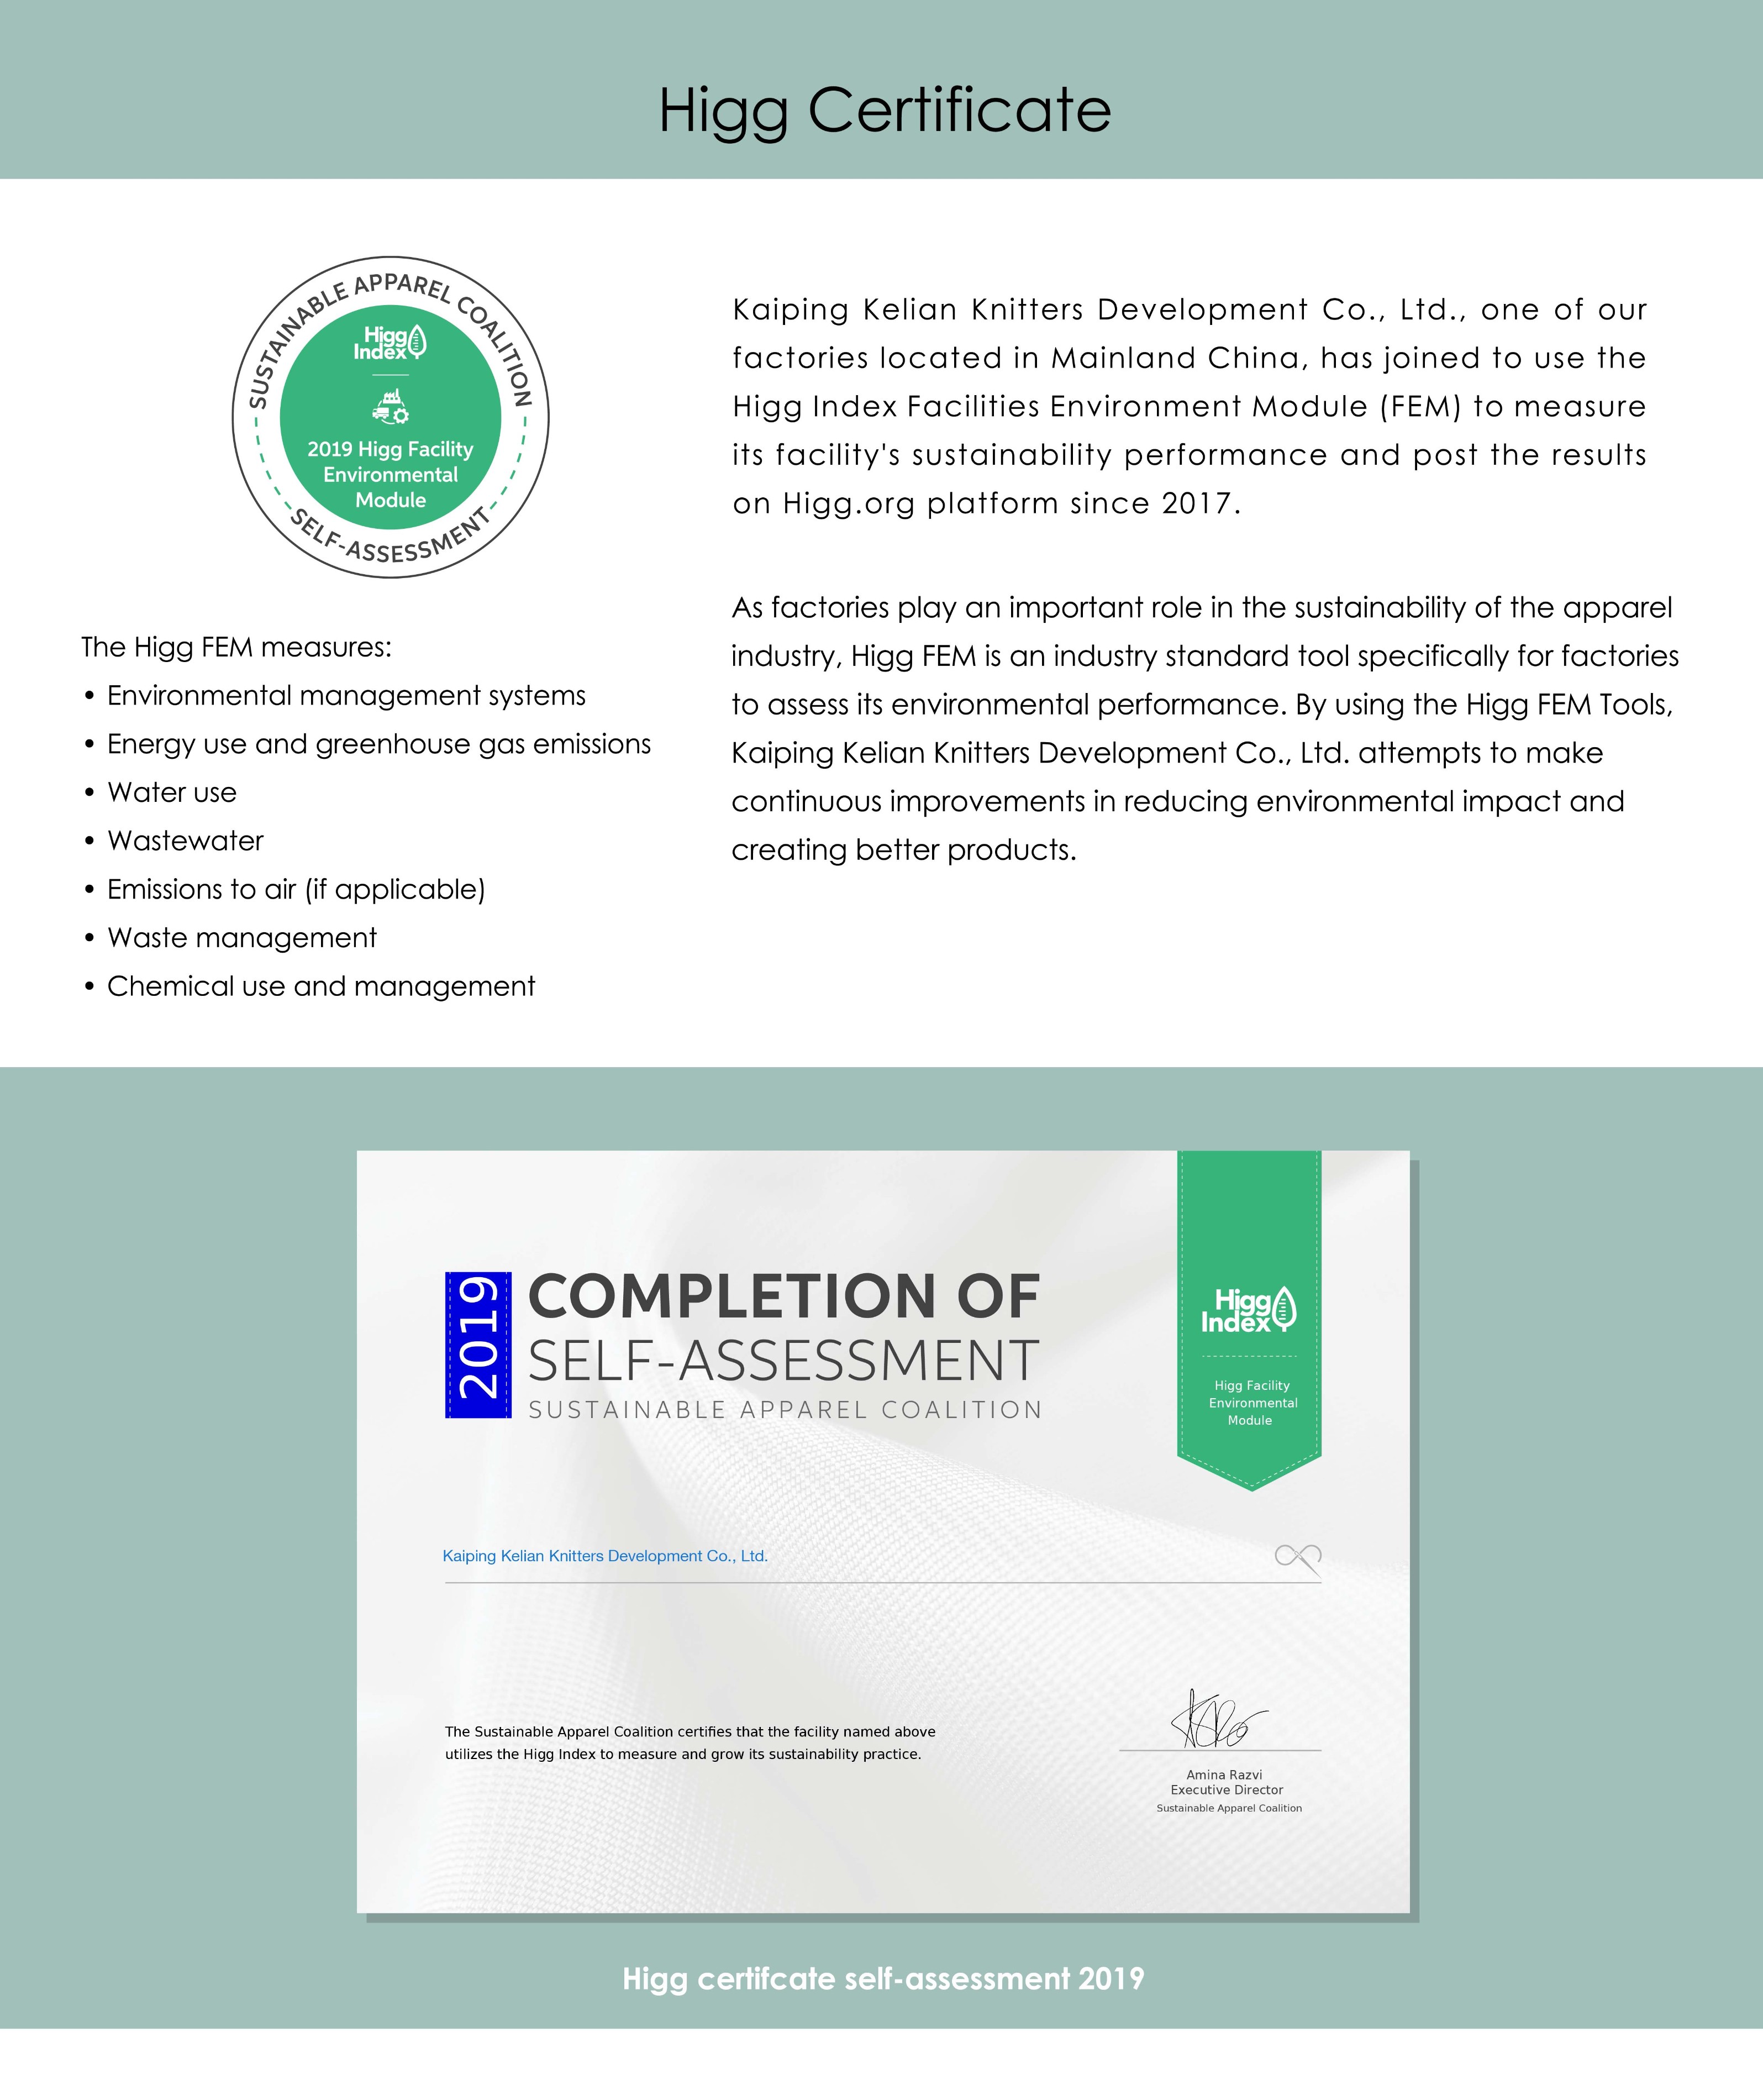 Completed the self-assessment of Higg Index Facility Environmental Module (Higg FEM) for 2019